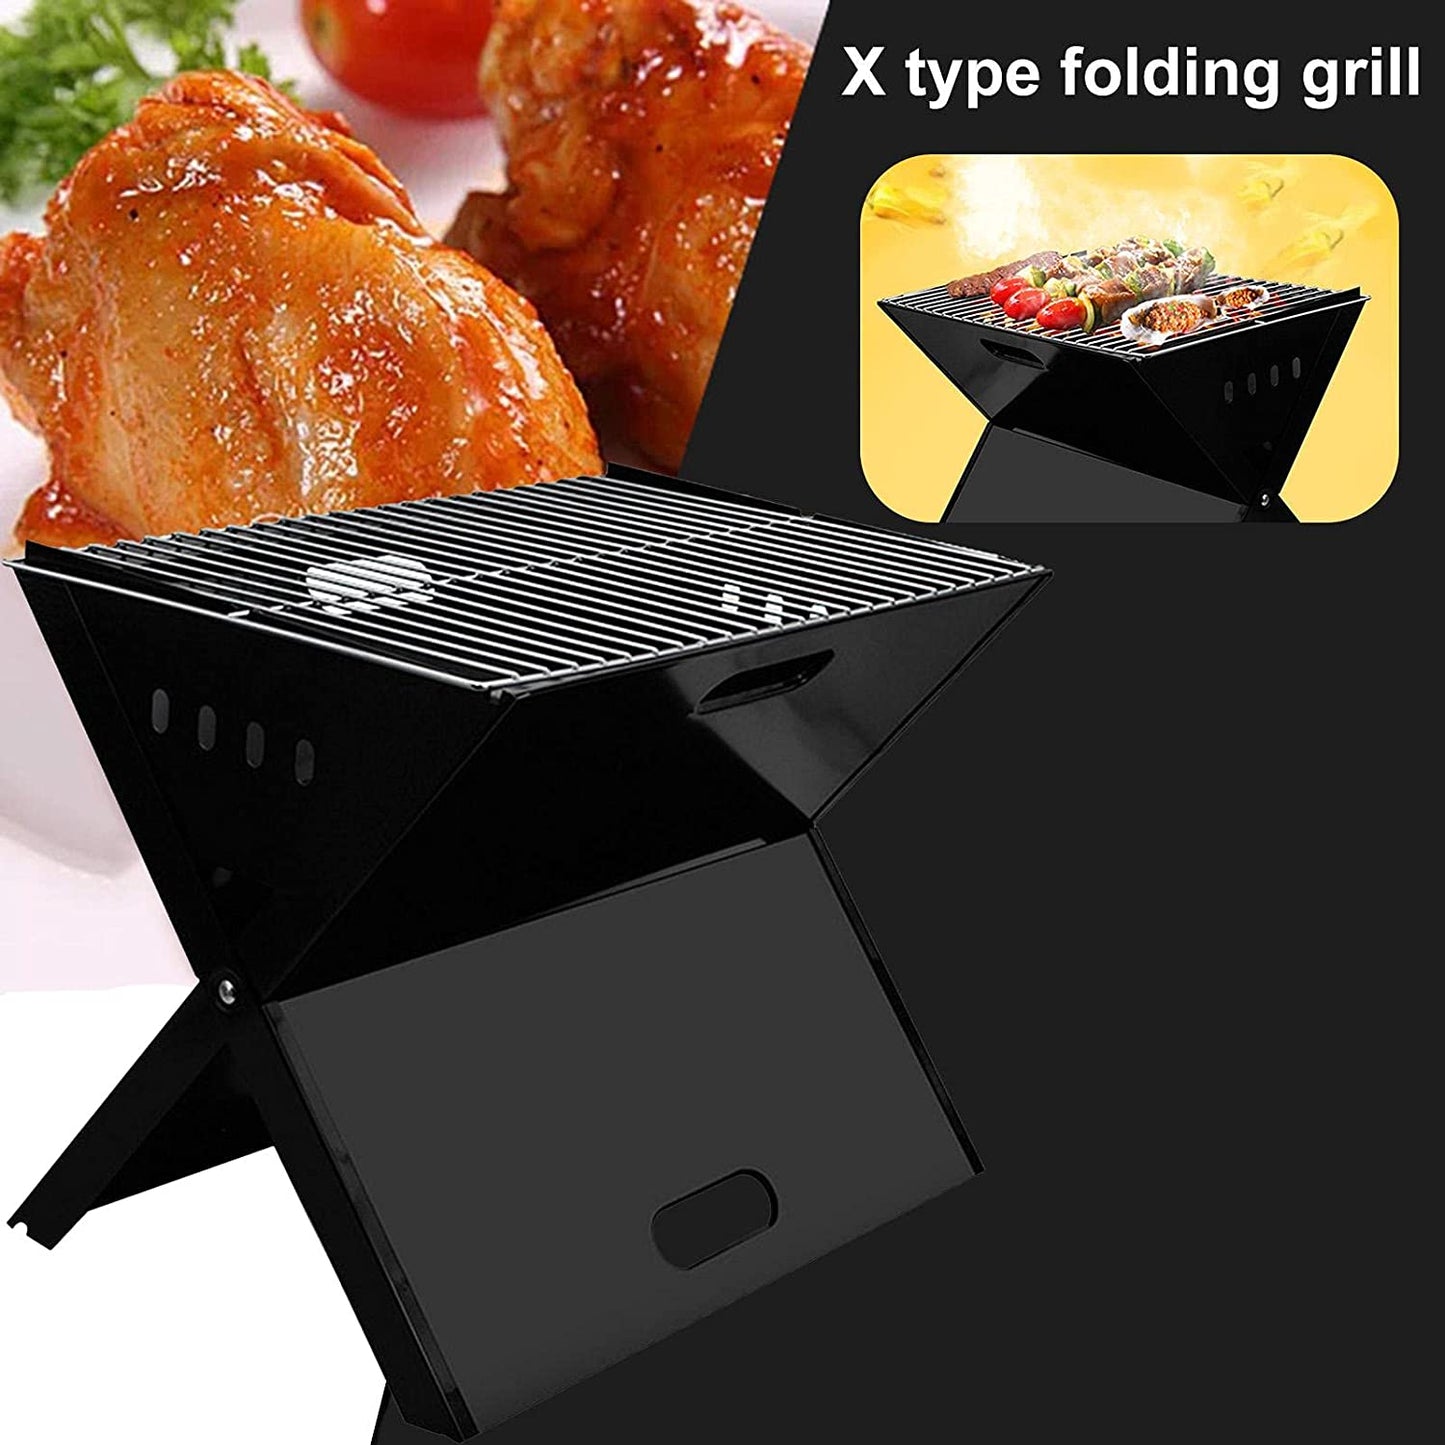 Foldable Barbecue Grill BBQ Portable Outdoor X-Type Picnic Stove for Outdoor Campers Barbecue Lovers Travel Park Beach Wild